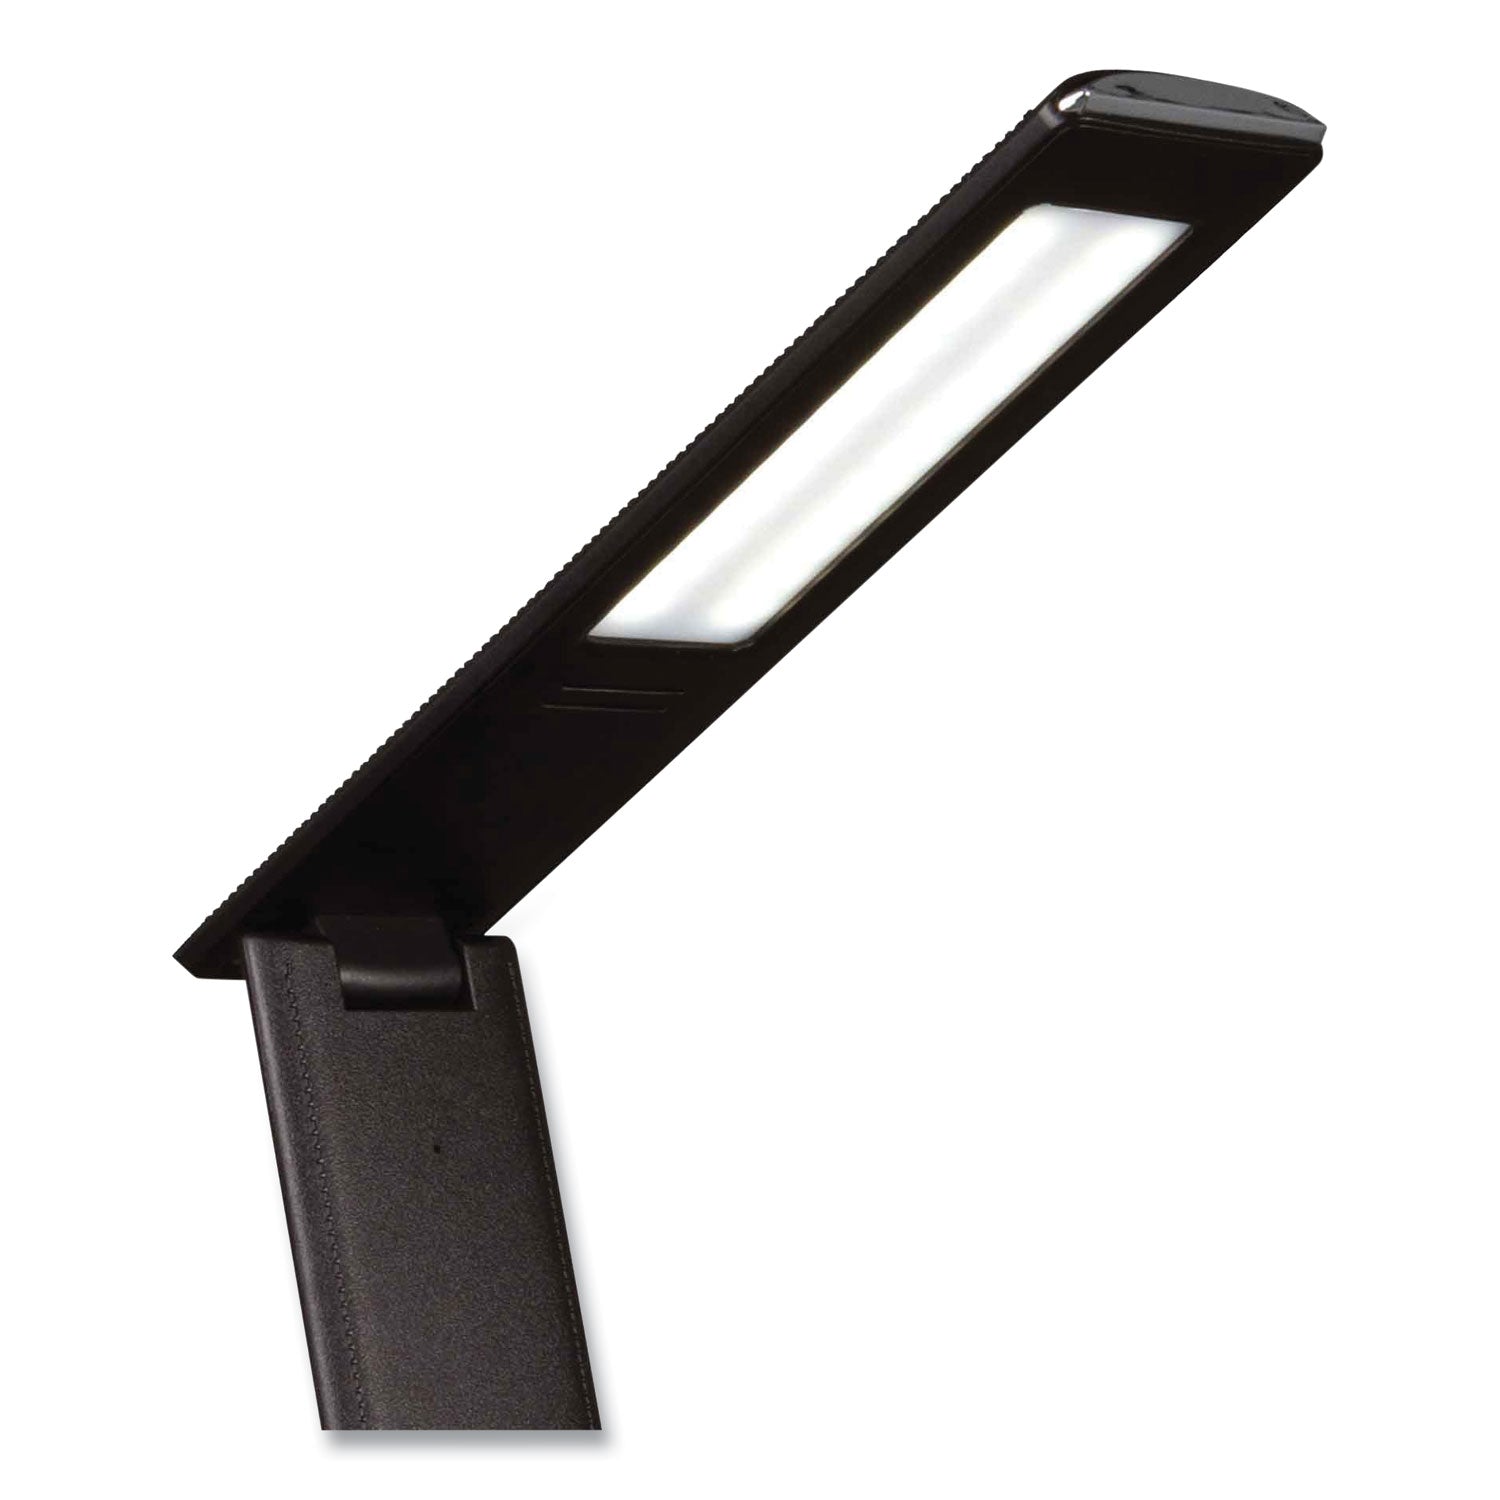 wellness-series-rise-led-desk-lamp-with-digital-display-12-to-19-high-black-ships-in-4-6-business-days_ottcse13g59 - 4